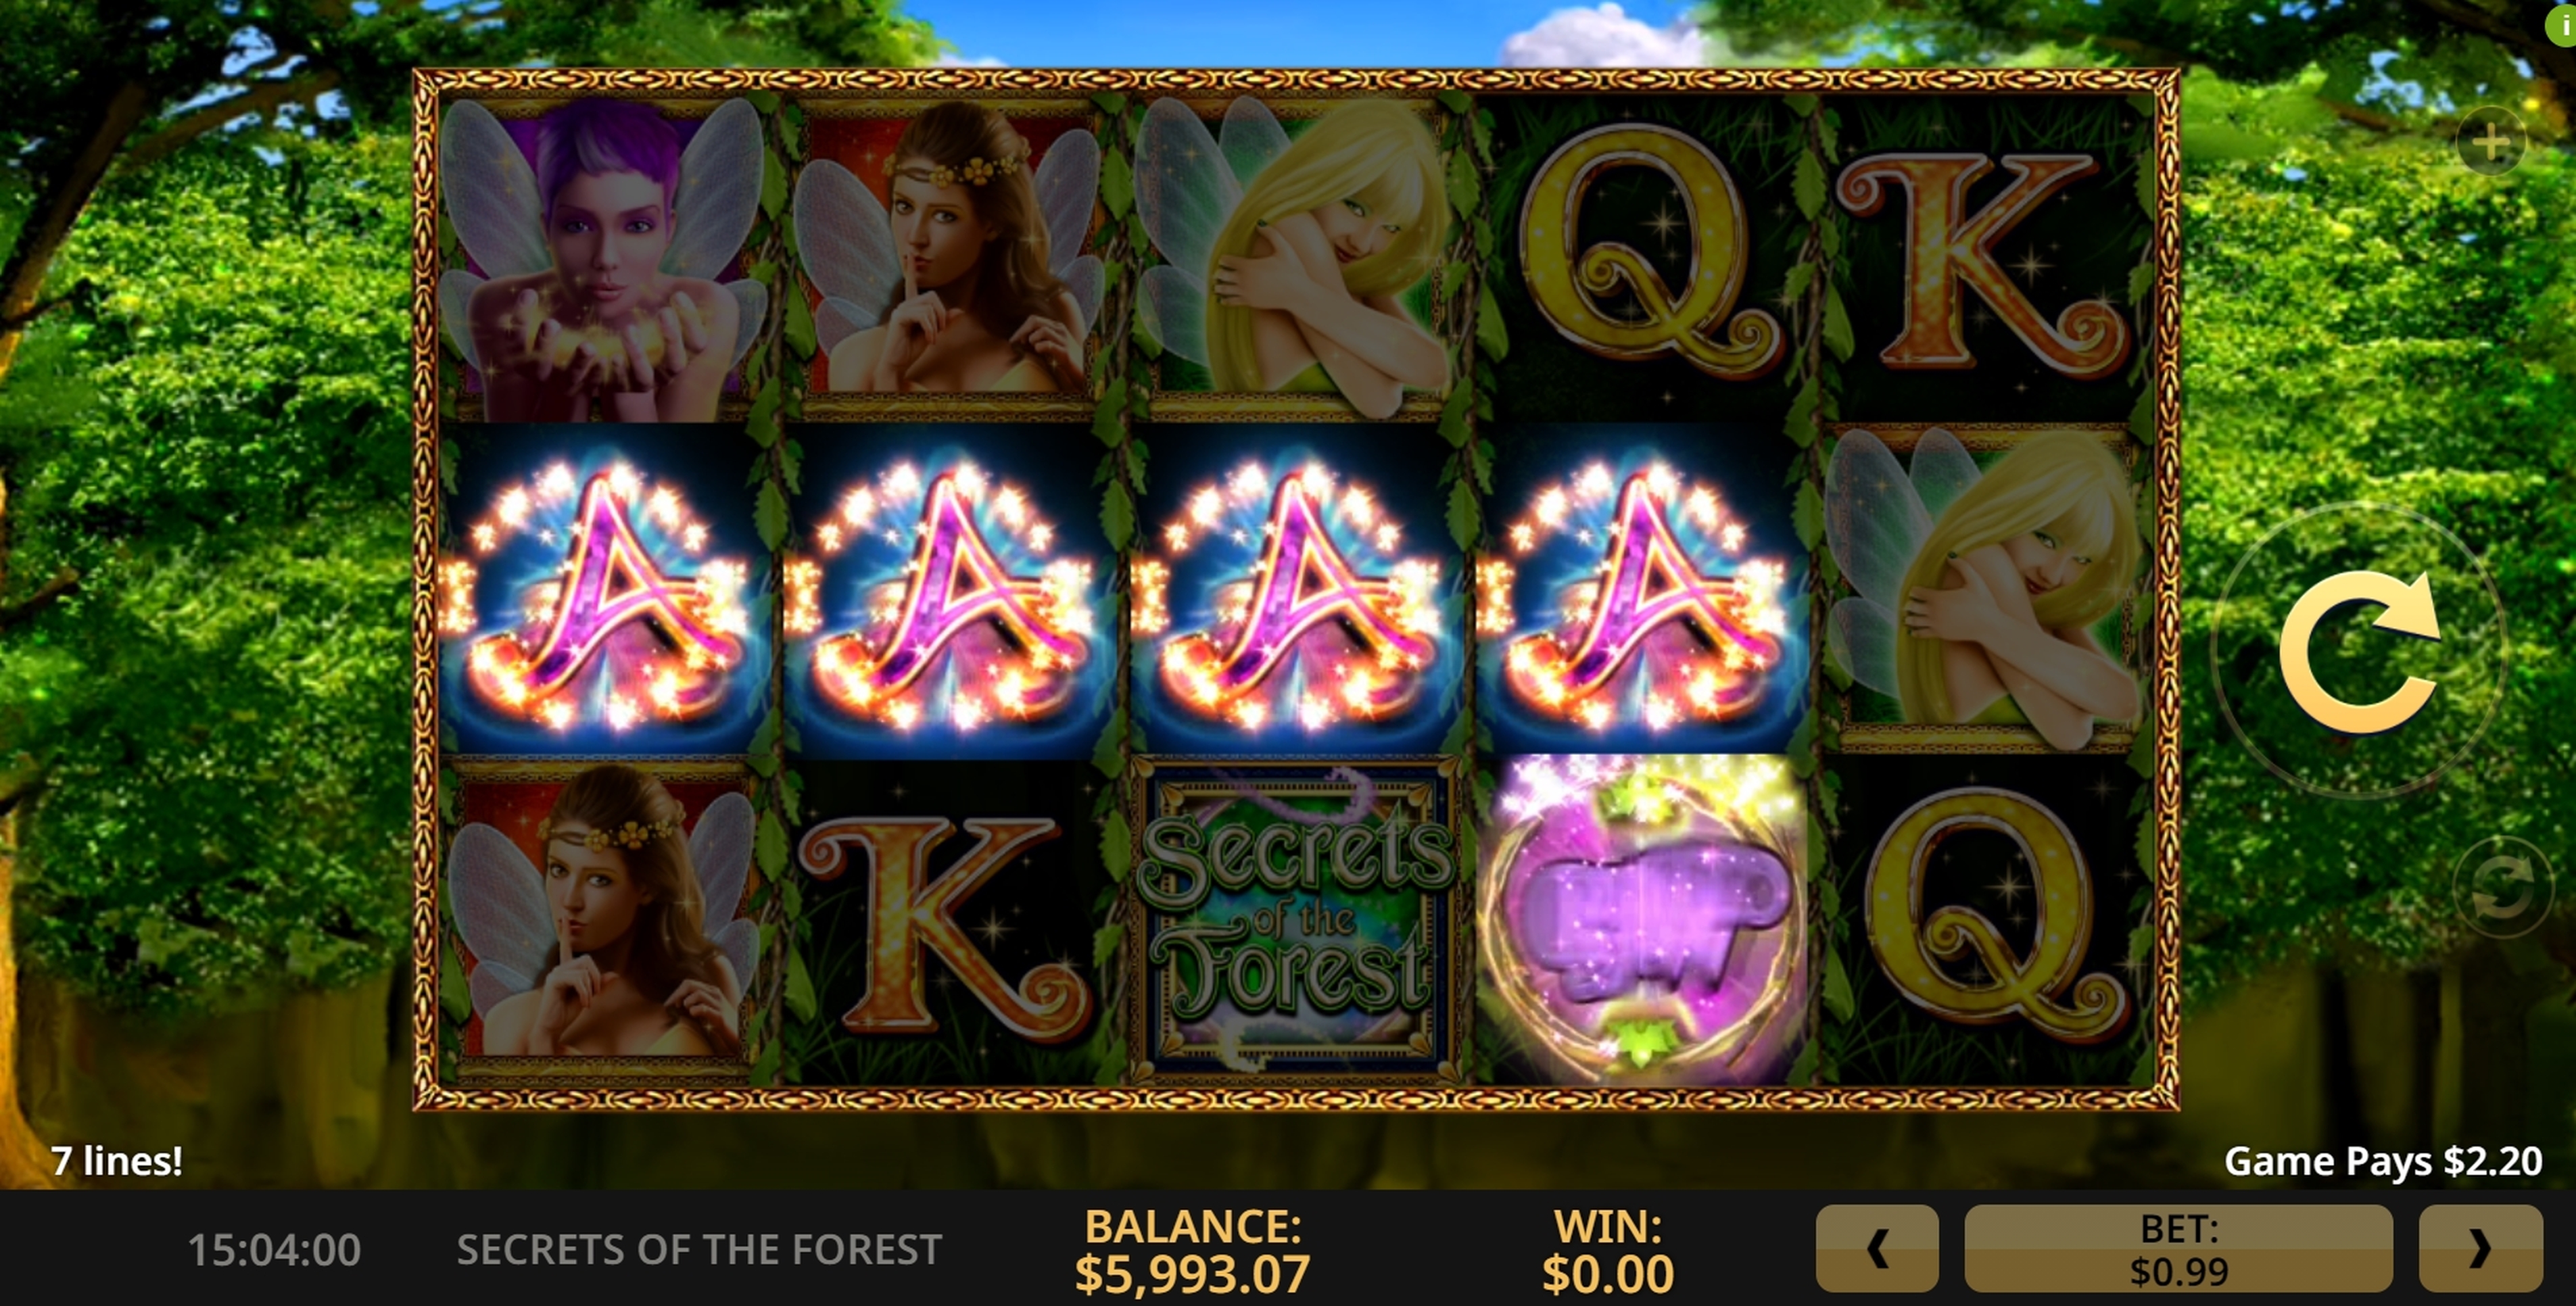 Win Money in Secrets Of The Forest Free Slot Game by High 5 Games